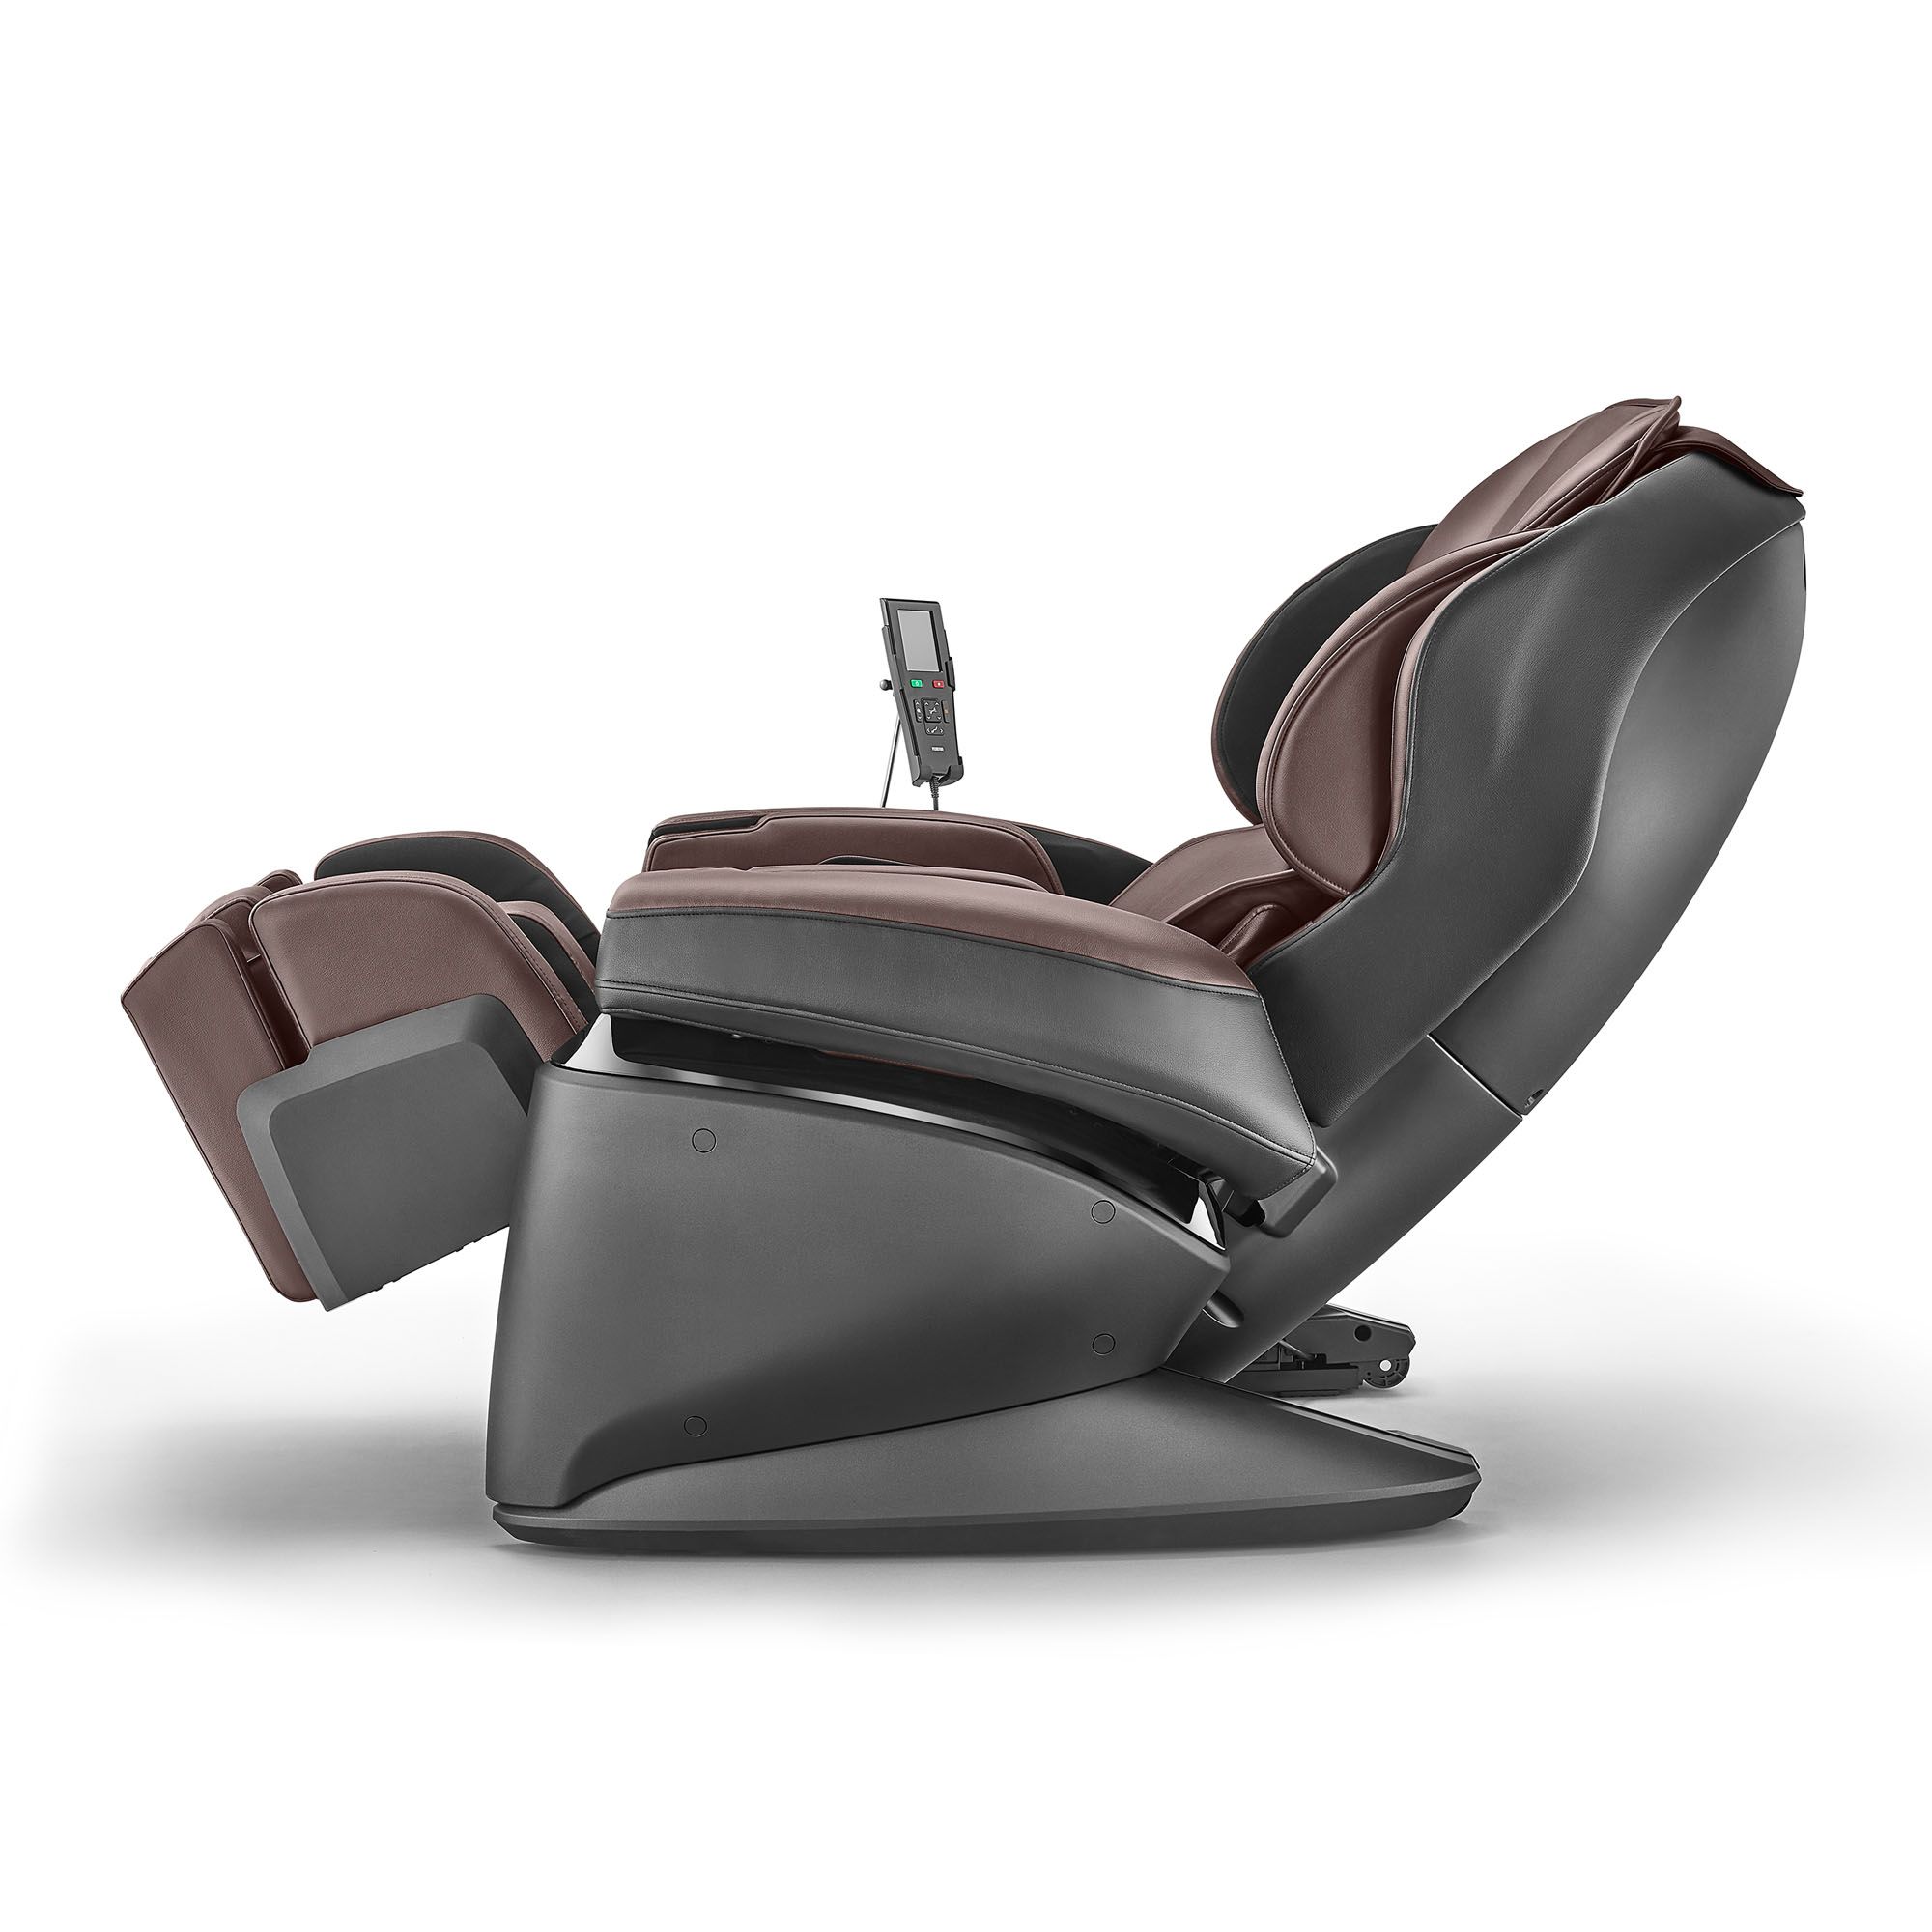 The Chiropractor's Choice as Best Massage Recliner for the spine